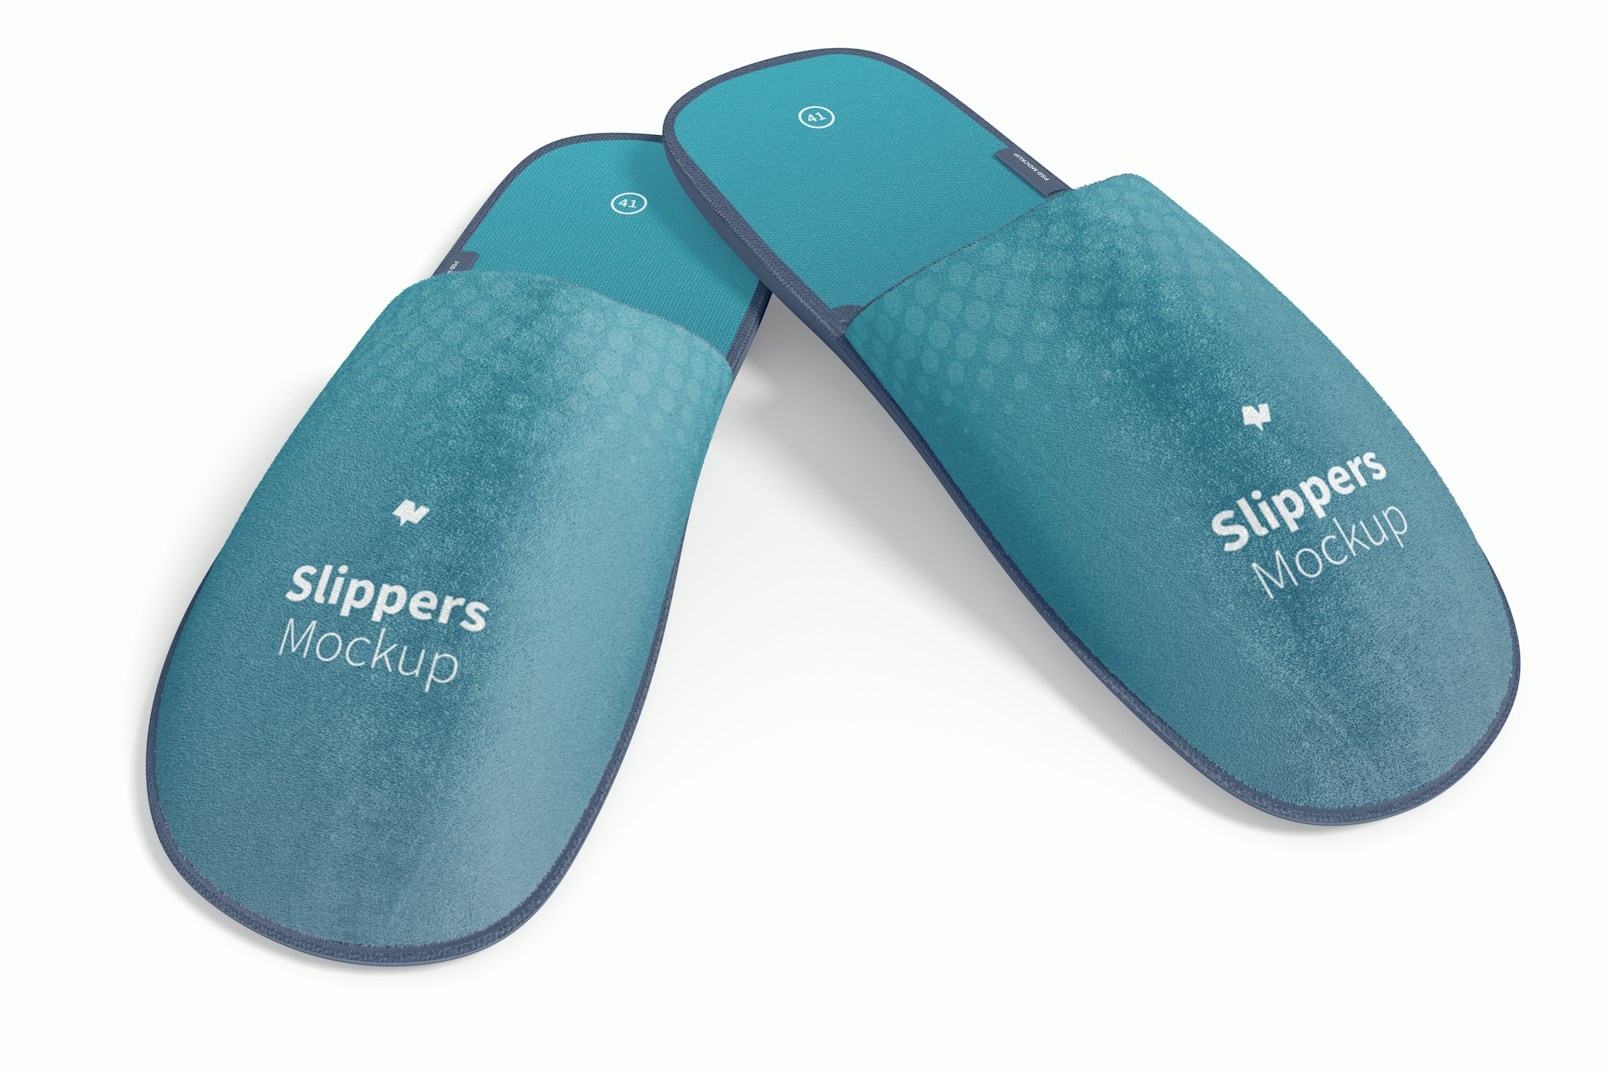 Slippers Mockup, Front View